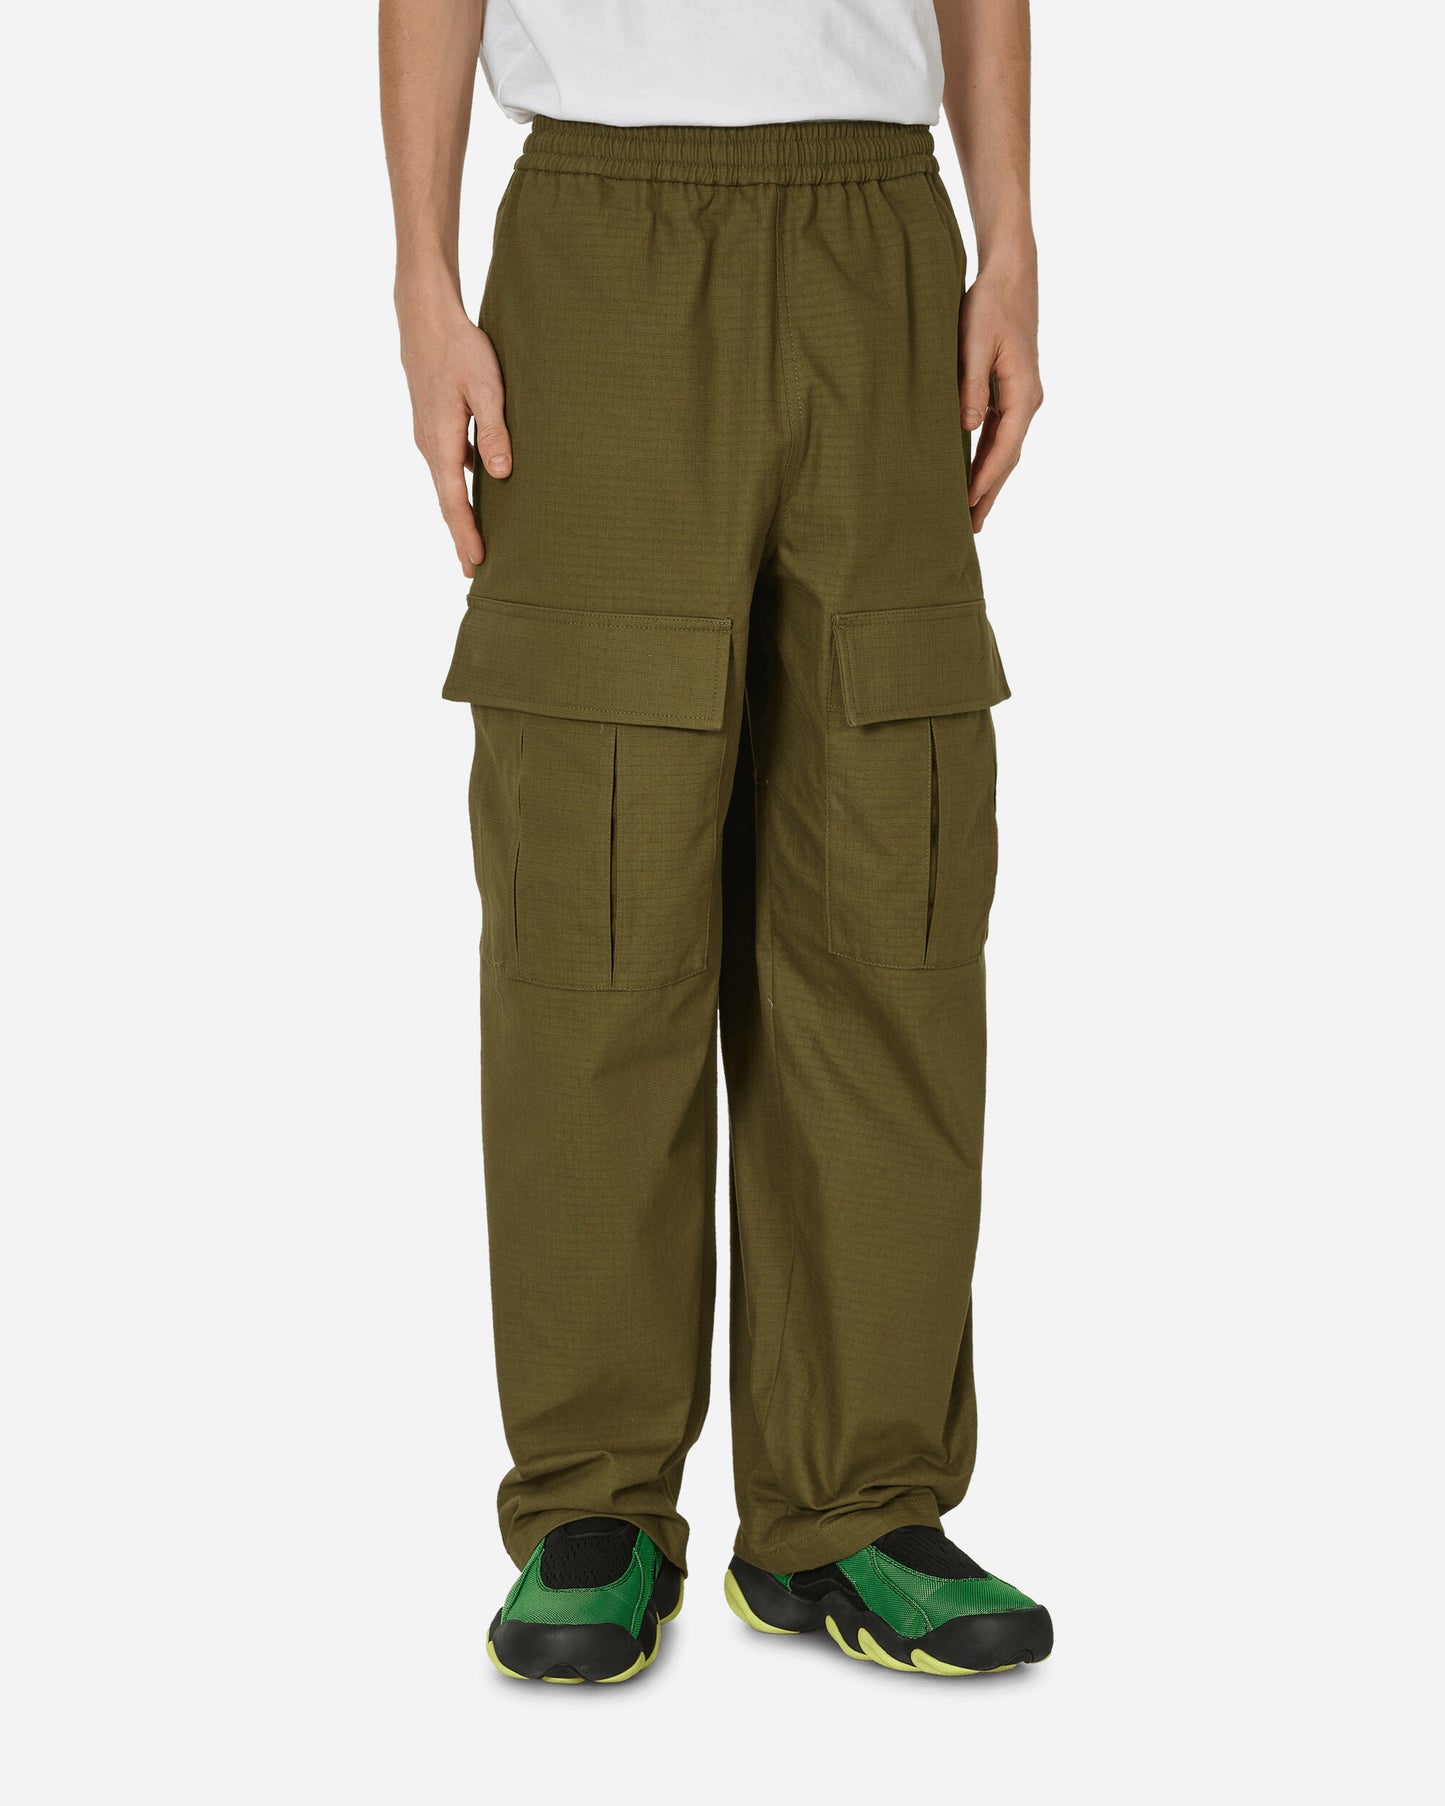 Acne Studios Casual Trouser Olive Green Pants Casual BK0560- AB7